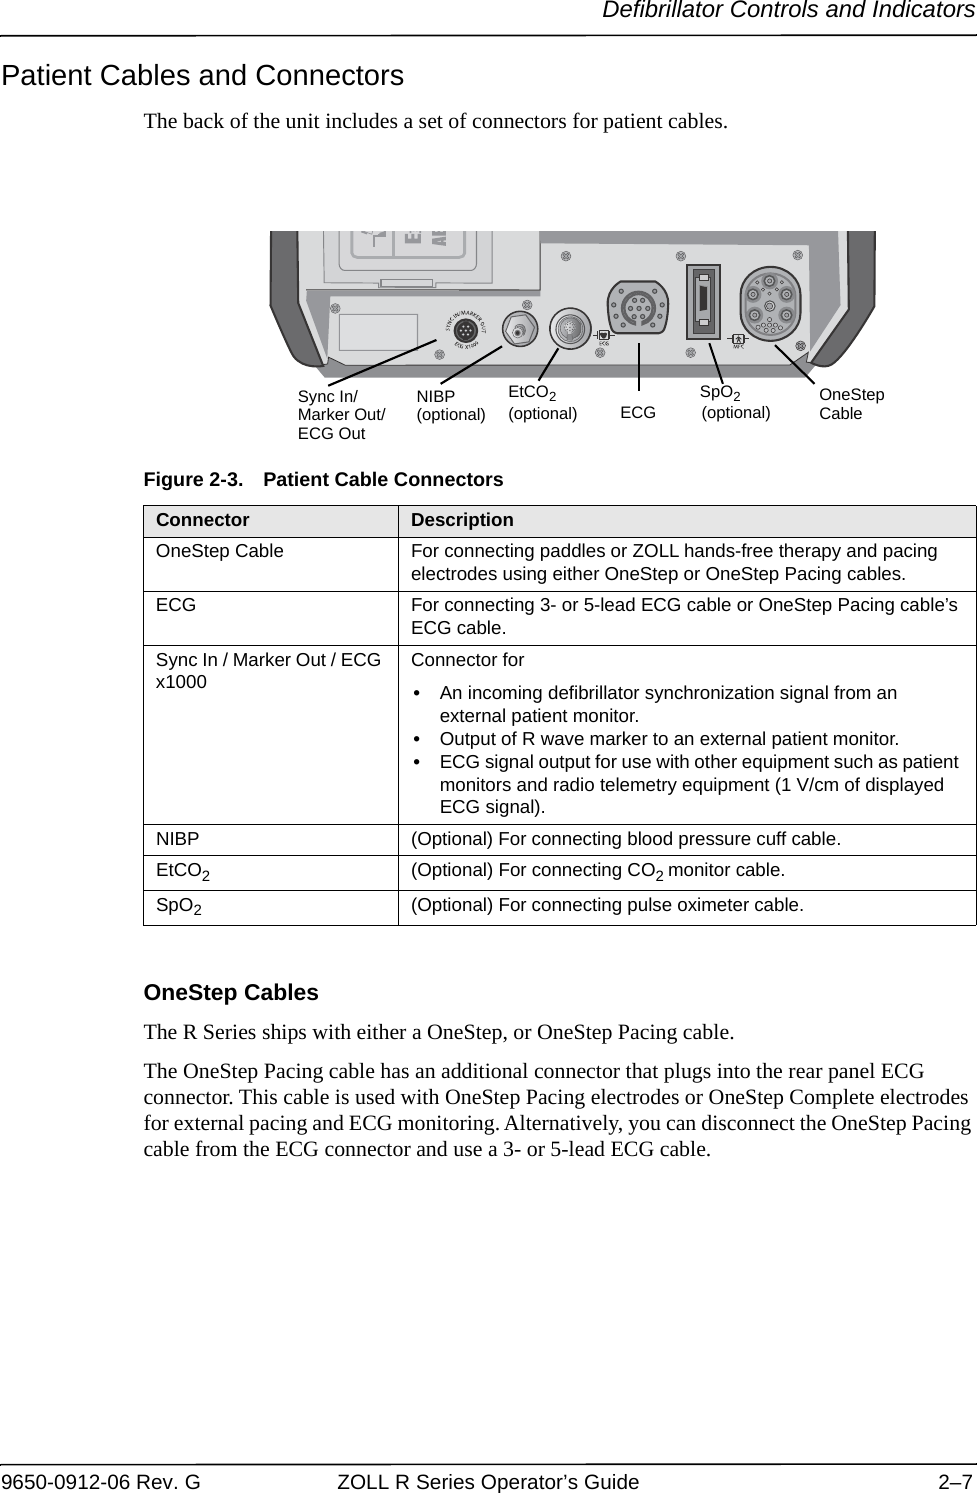 Defibrillator Controls and Indicators9650-0912-06 Rev. G ZOLL R Series Operator’s Guide 2–7Patient Cables and ConnectorsThe back of the unit includes a set of connectors for patient cables.Figure 2-3. Patient Cable ConnectorsOneStep CablesThe R Series ships with either a OneStep, or OneStep Pacing cable. The OneStep Pacing cable has an additional connector that plugs into the rear panel ECG connector. This cable is used with OneStep Pacing electrodes or OneStep Complete electrodes for external pacing and ECG monitoring. Alternatively, you can disconnect the OneStep Pacing cable from the ECG connector and use a 3- or 5-lead ECG cable. Connector DescriptionOneStep Cable For connecting paddles or ZOLL hands-free therapy and pacing electrodes using either OneStep or OneStep Pacing cables.ECG For connecting 3- or 5-lead ECG cable or OneStep Pacing cable’s ECG cable.Sync In / Marker Out / ECG x1000 Connector for •An incoming defibrillator synchronization signal from an external patient monitor.•Output of R wave marker to an external patient monitor.•ECG signal output for use with other equipment such as patient monitors and radio telemetry equipment (1 V/cm of displayed ECG signal).NIBP (Optional) For connecting blood pressure cuff cable.EtCO2(Optional) For connecting CO2 monitor cable.SpO2(Optional) For connecting pulse oximeter cable.OneStepSpO2(optional) CableSync In/Marker Out/ECG OutECGNIBP(optional)EtCO2(optional)